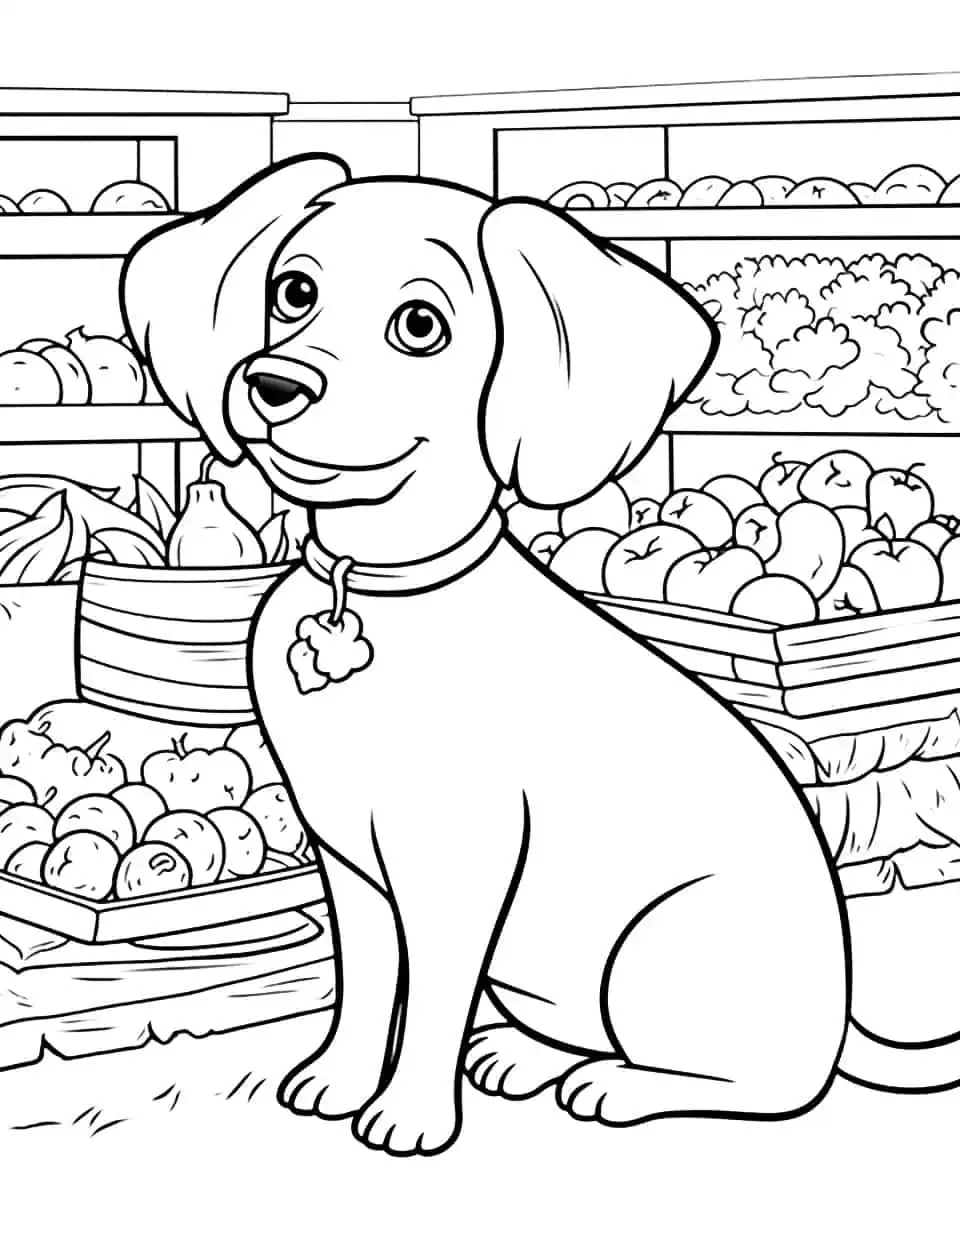 Dachshund at the Market Dog Coloring Page - A Dachshund exploring a local market, sniffing out some fresh produce.